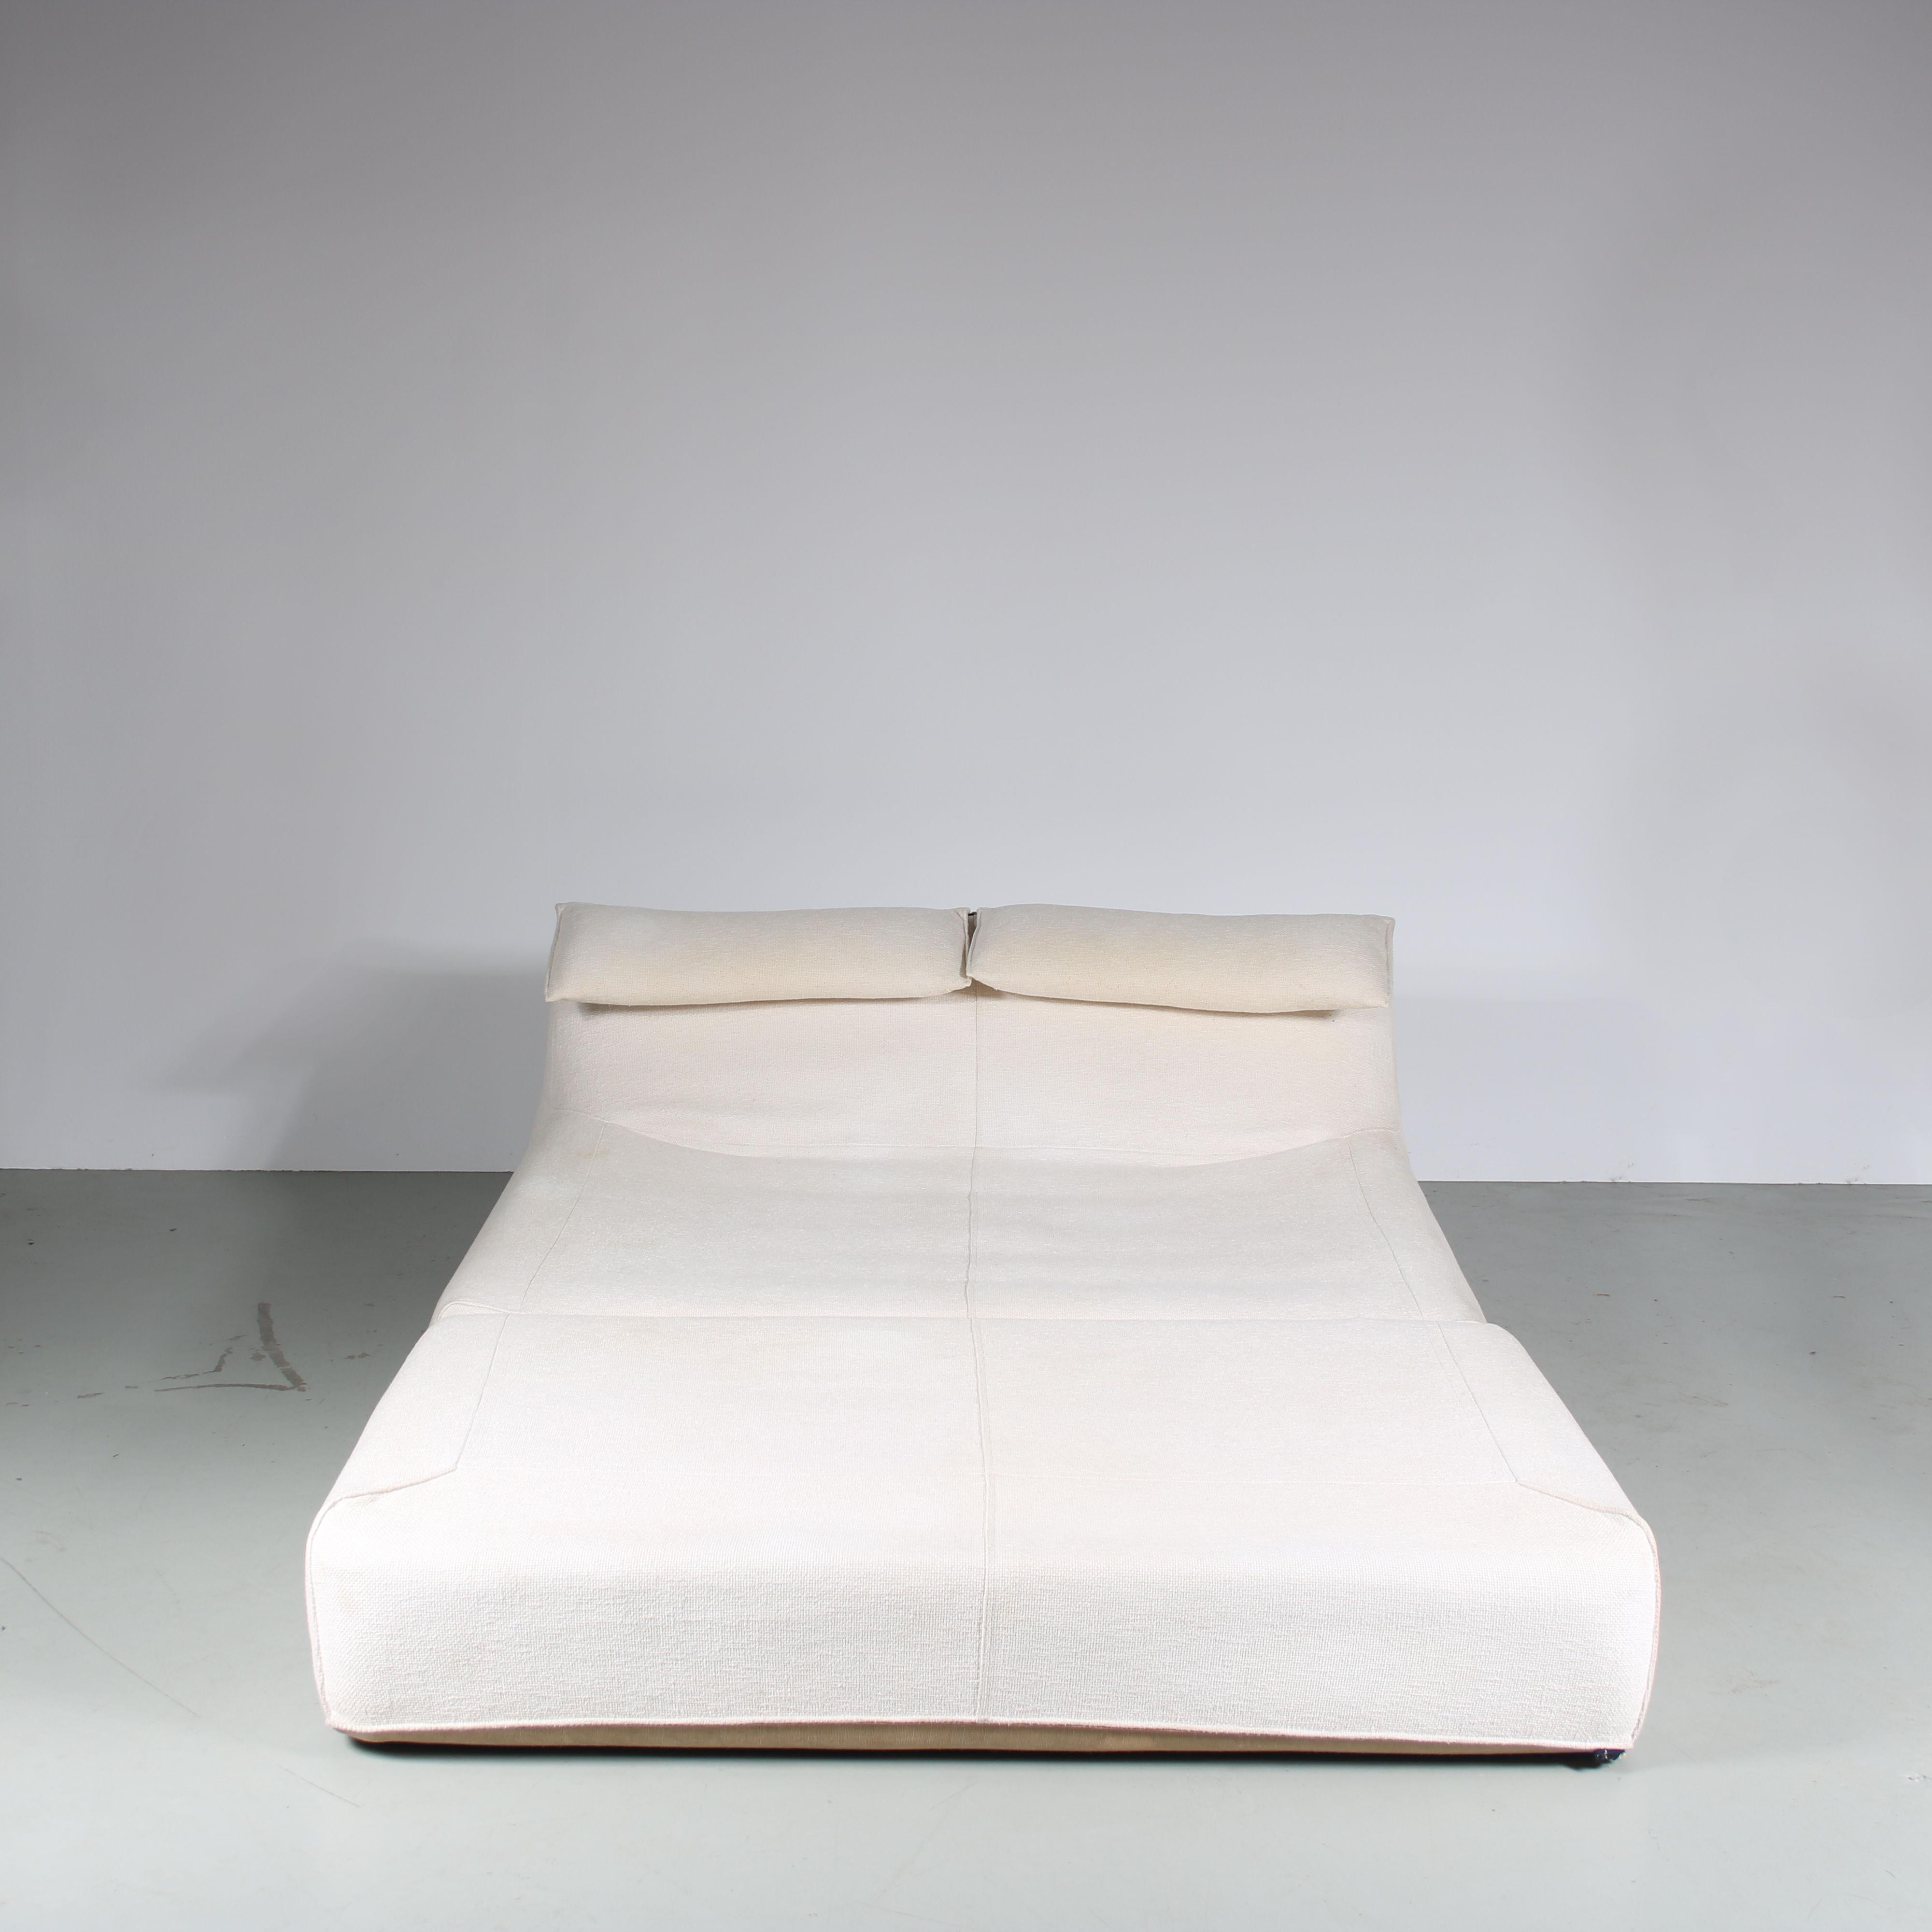 An eye-catching “Bambole” daybed, designed by Mario Bellini and manufactured by B&B Italia in Italy around 1970.

This exquisite Italian daybed / sleeping sofa is upholstered in high quality white fabric. The “Bambole” daybed has a unique folding